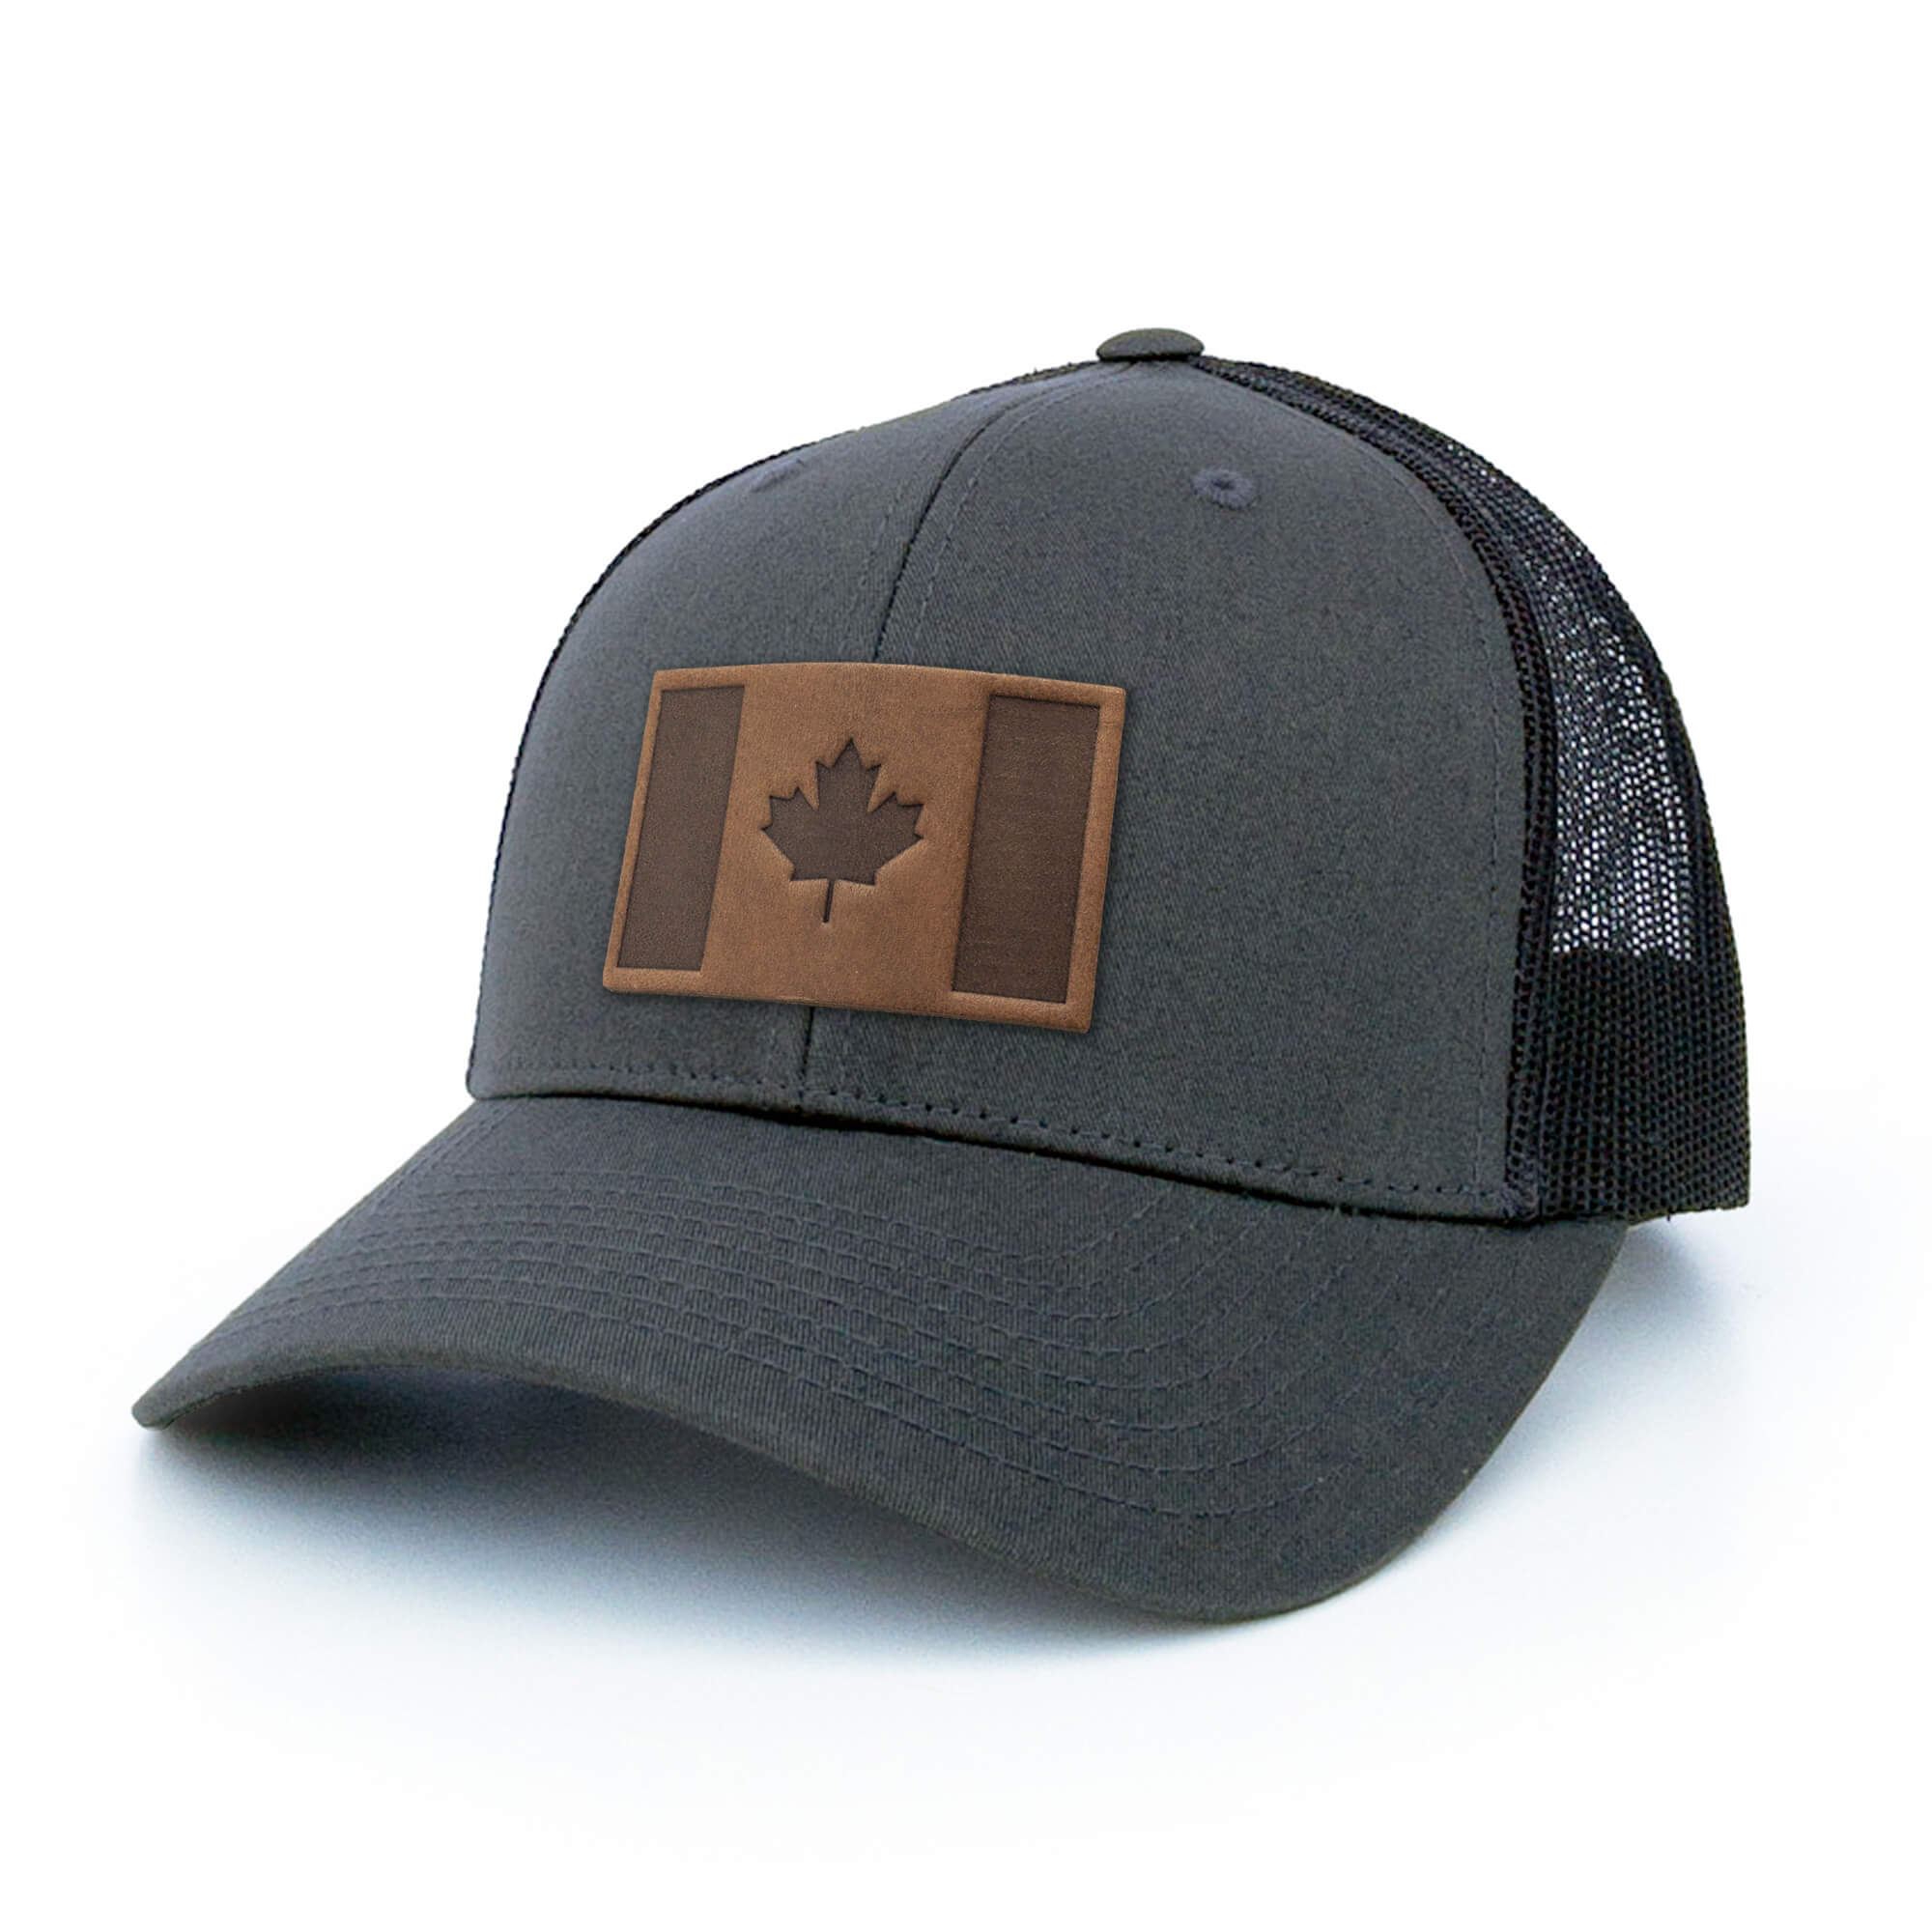 Charcoal trucker hat with full-grain leather patch of Canada Flag | BLACK-002-009, CHARC-002-009, NAVY-002-009, HGREY-002-009, MOSS-002-009, BROWN-002-009, RED-002-009